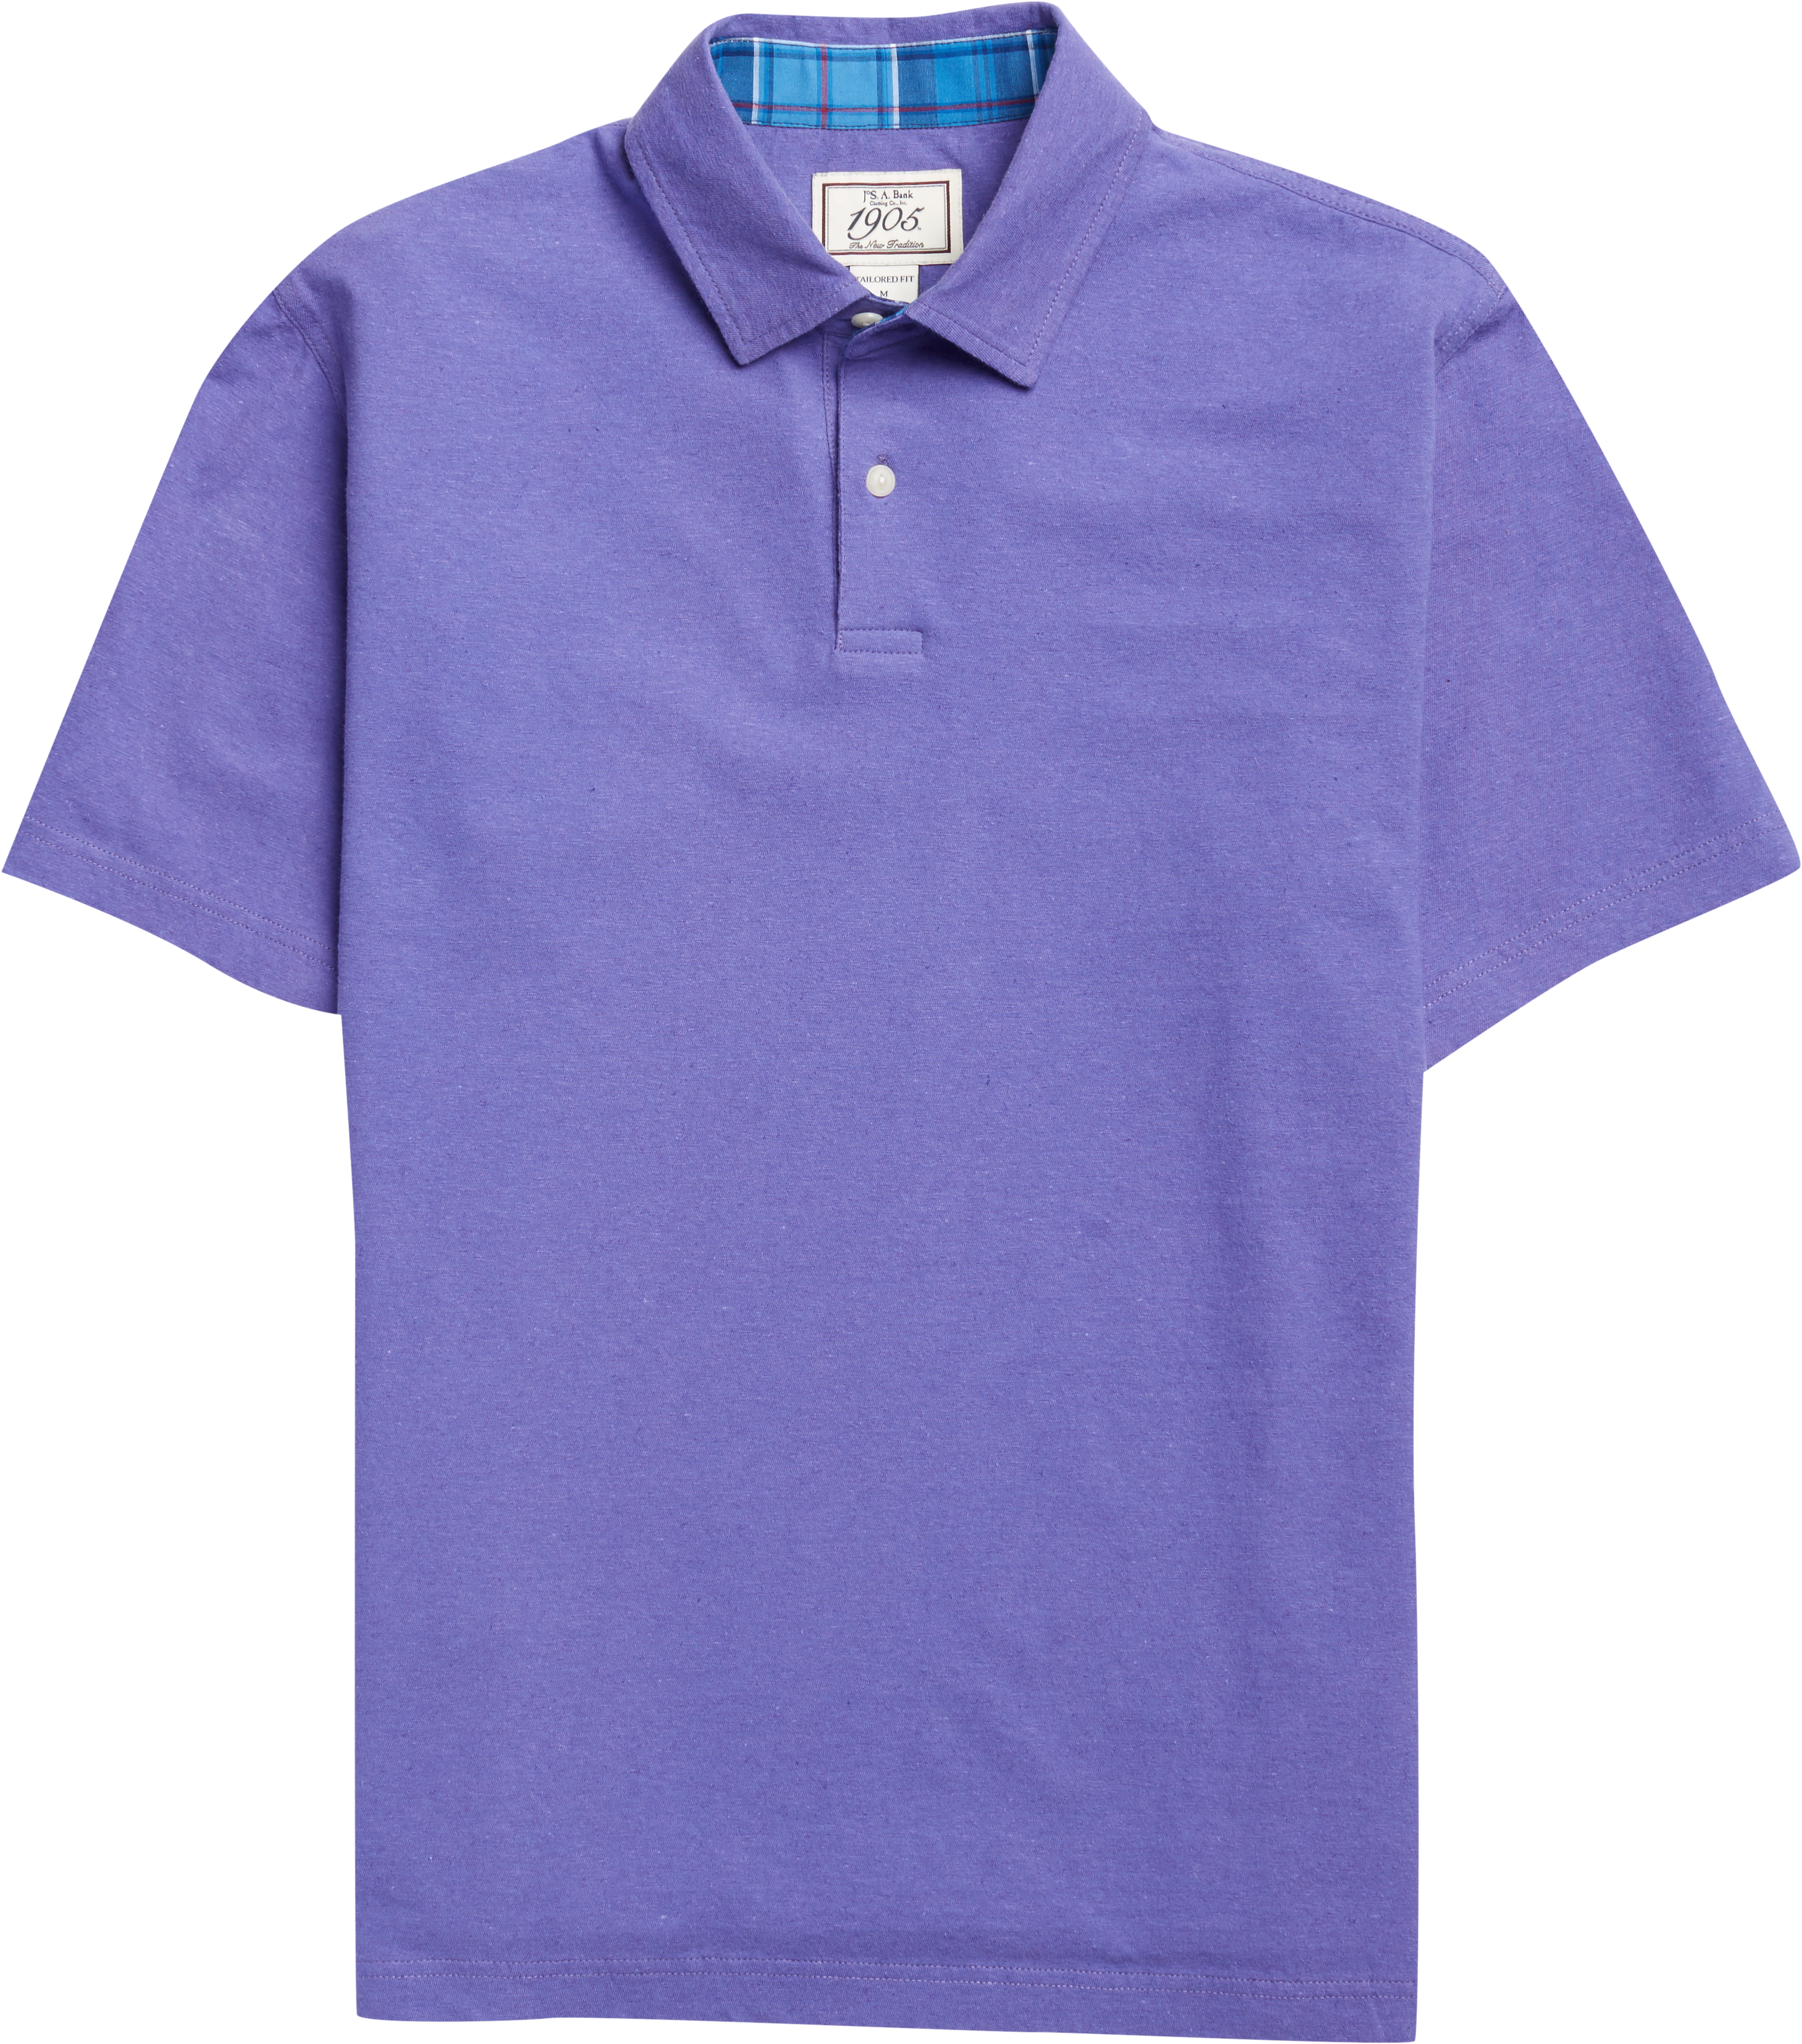 1905 Collection Tailored Fit Polo Shirt CLEARANCE - Clearance Polos ...